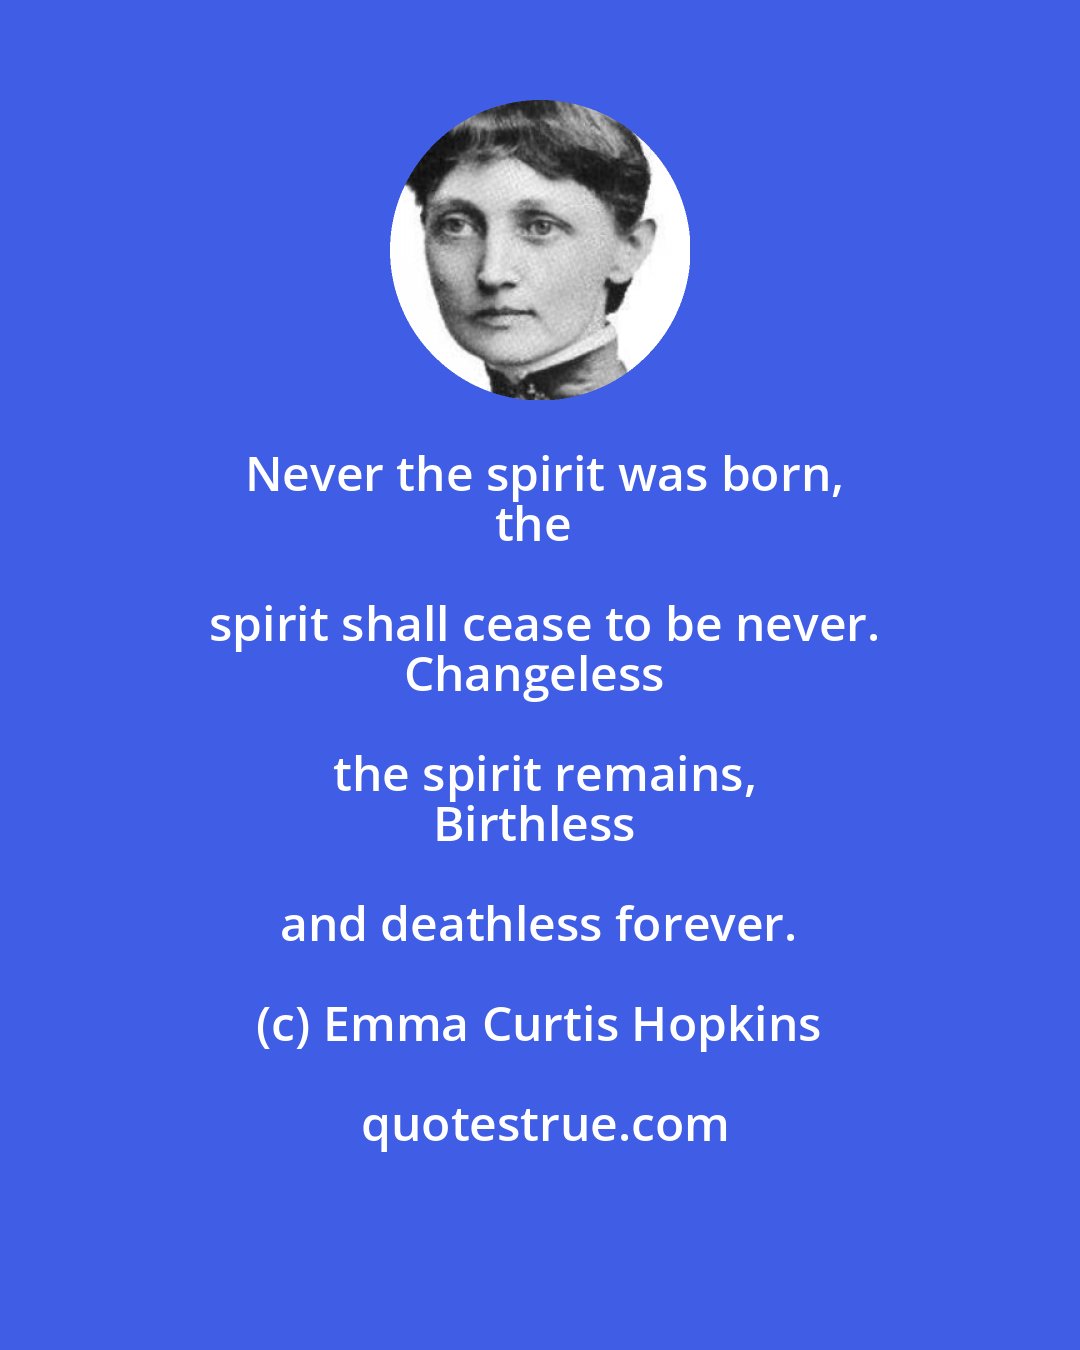 Emma Curtis Hopkins: Never the spirit was born,
the spirit shall cease to be never.
Changeless the spirit remains,
Birthless and deathless forever.